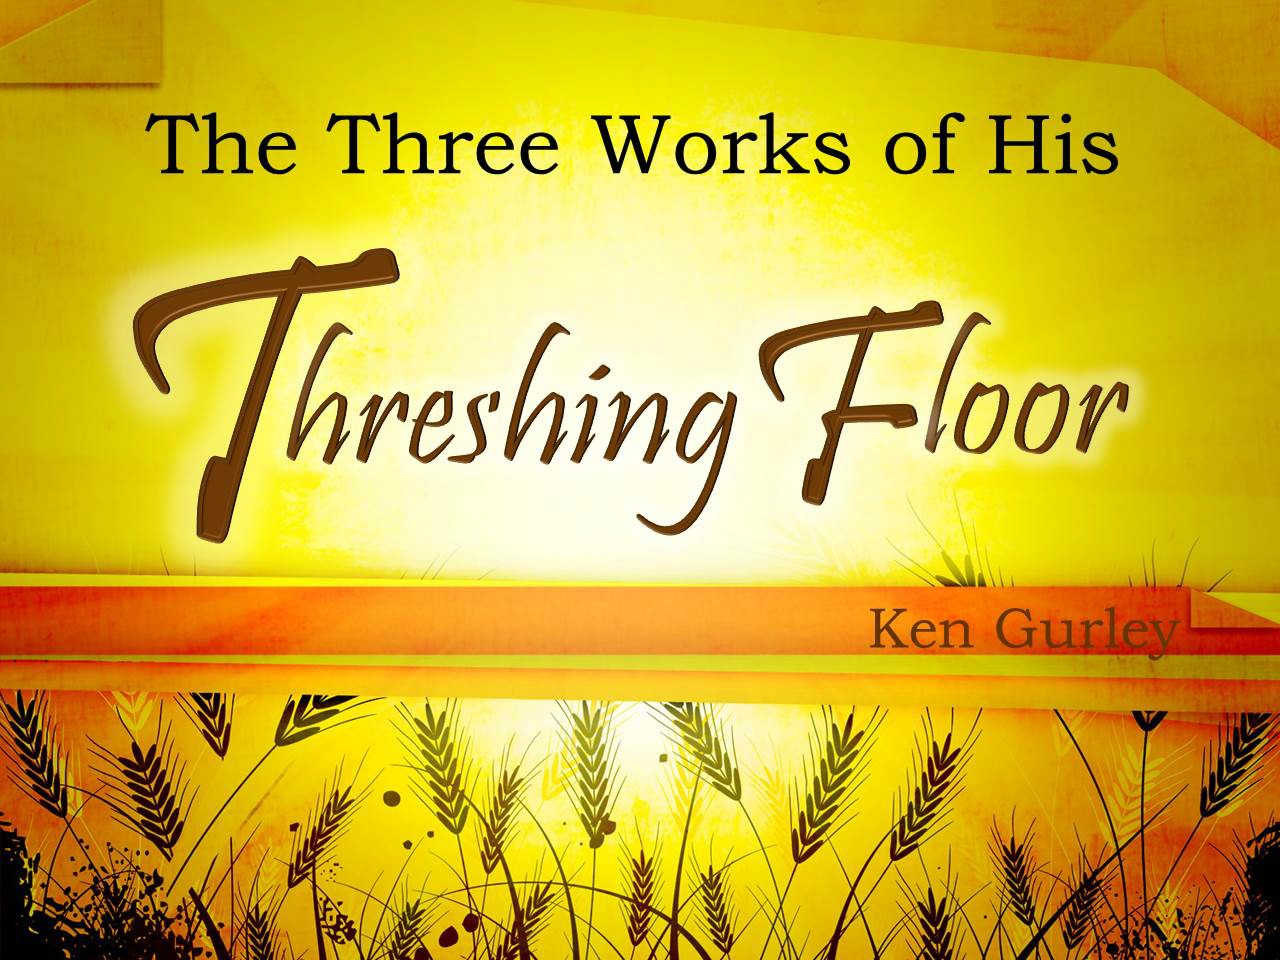 The Three Works Of His Threshing Floor Entire Article